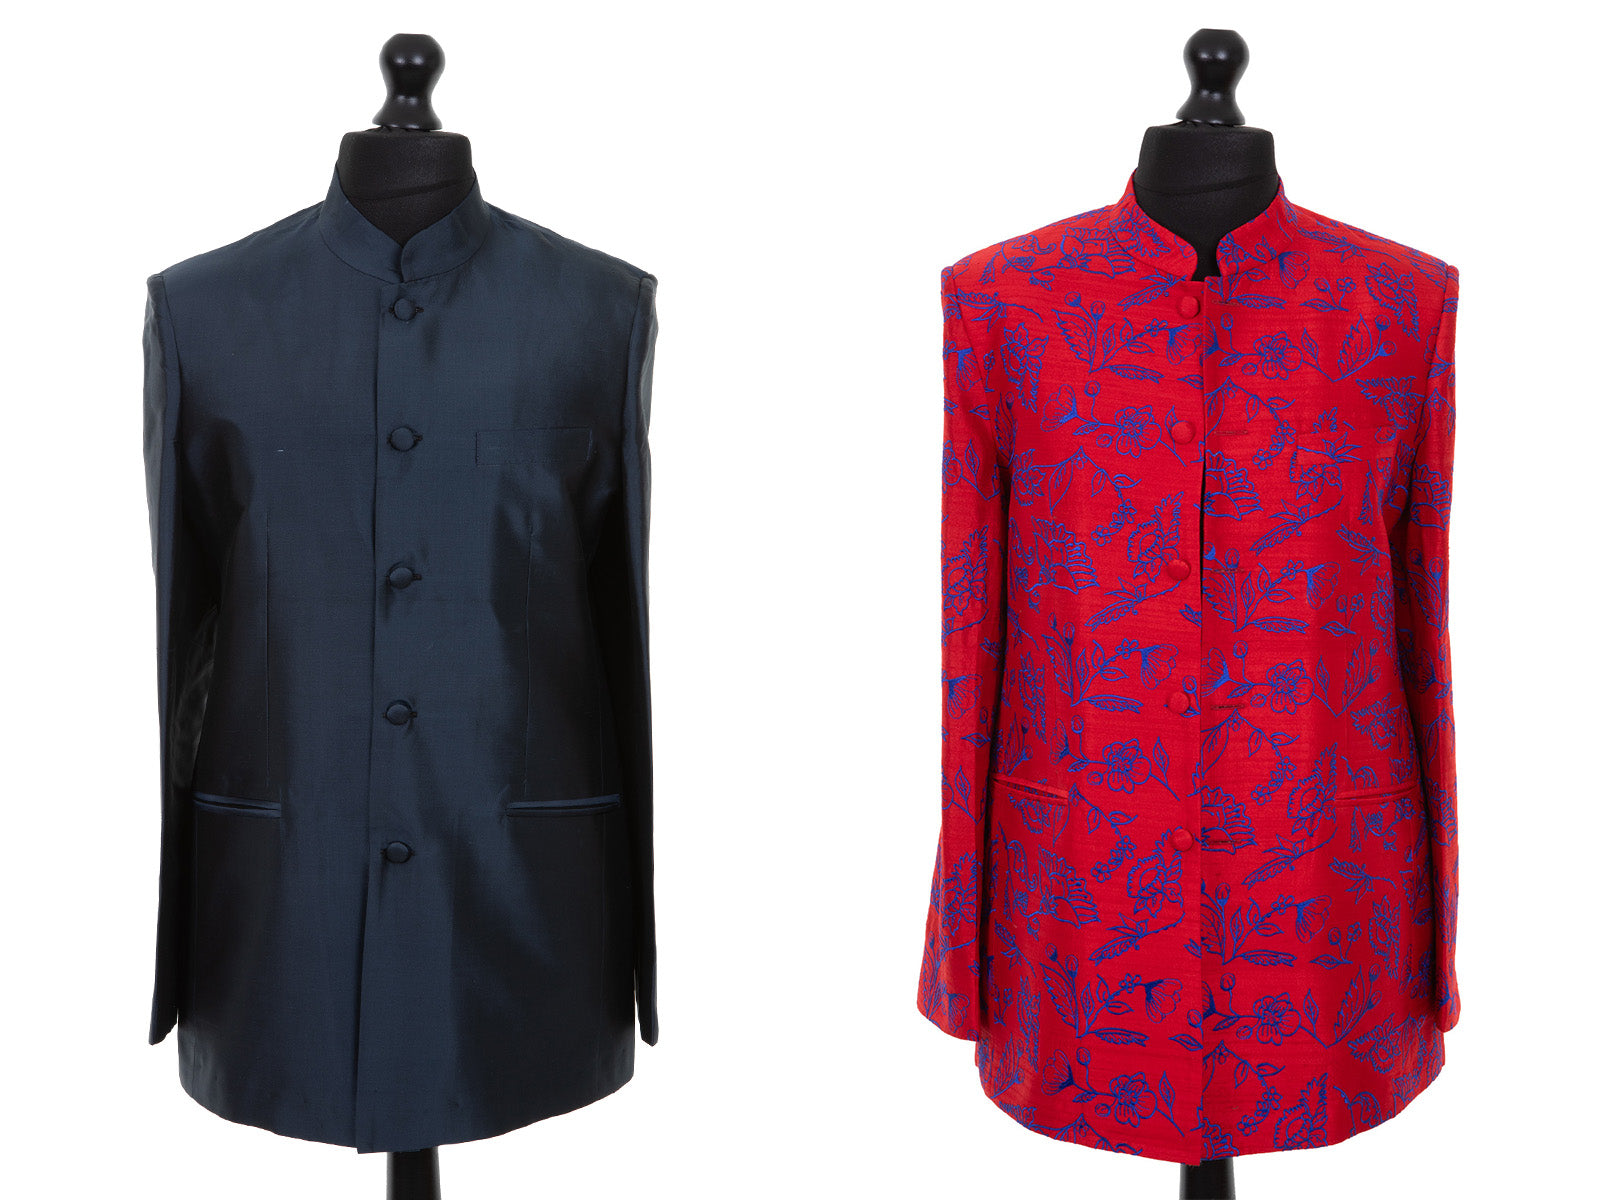 Mens nehru jacket in plain slate grey raw silk on the left and pillar box red embroidered silk, with cobalt embroidery on the right